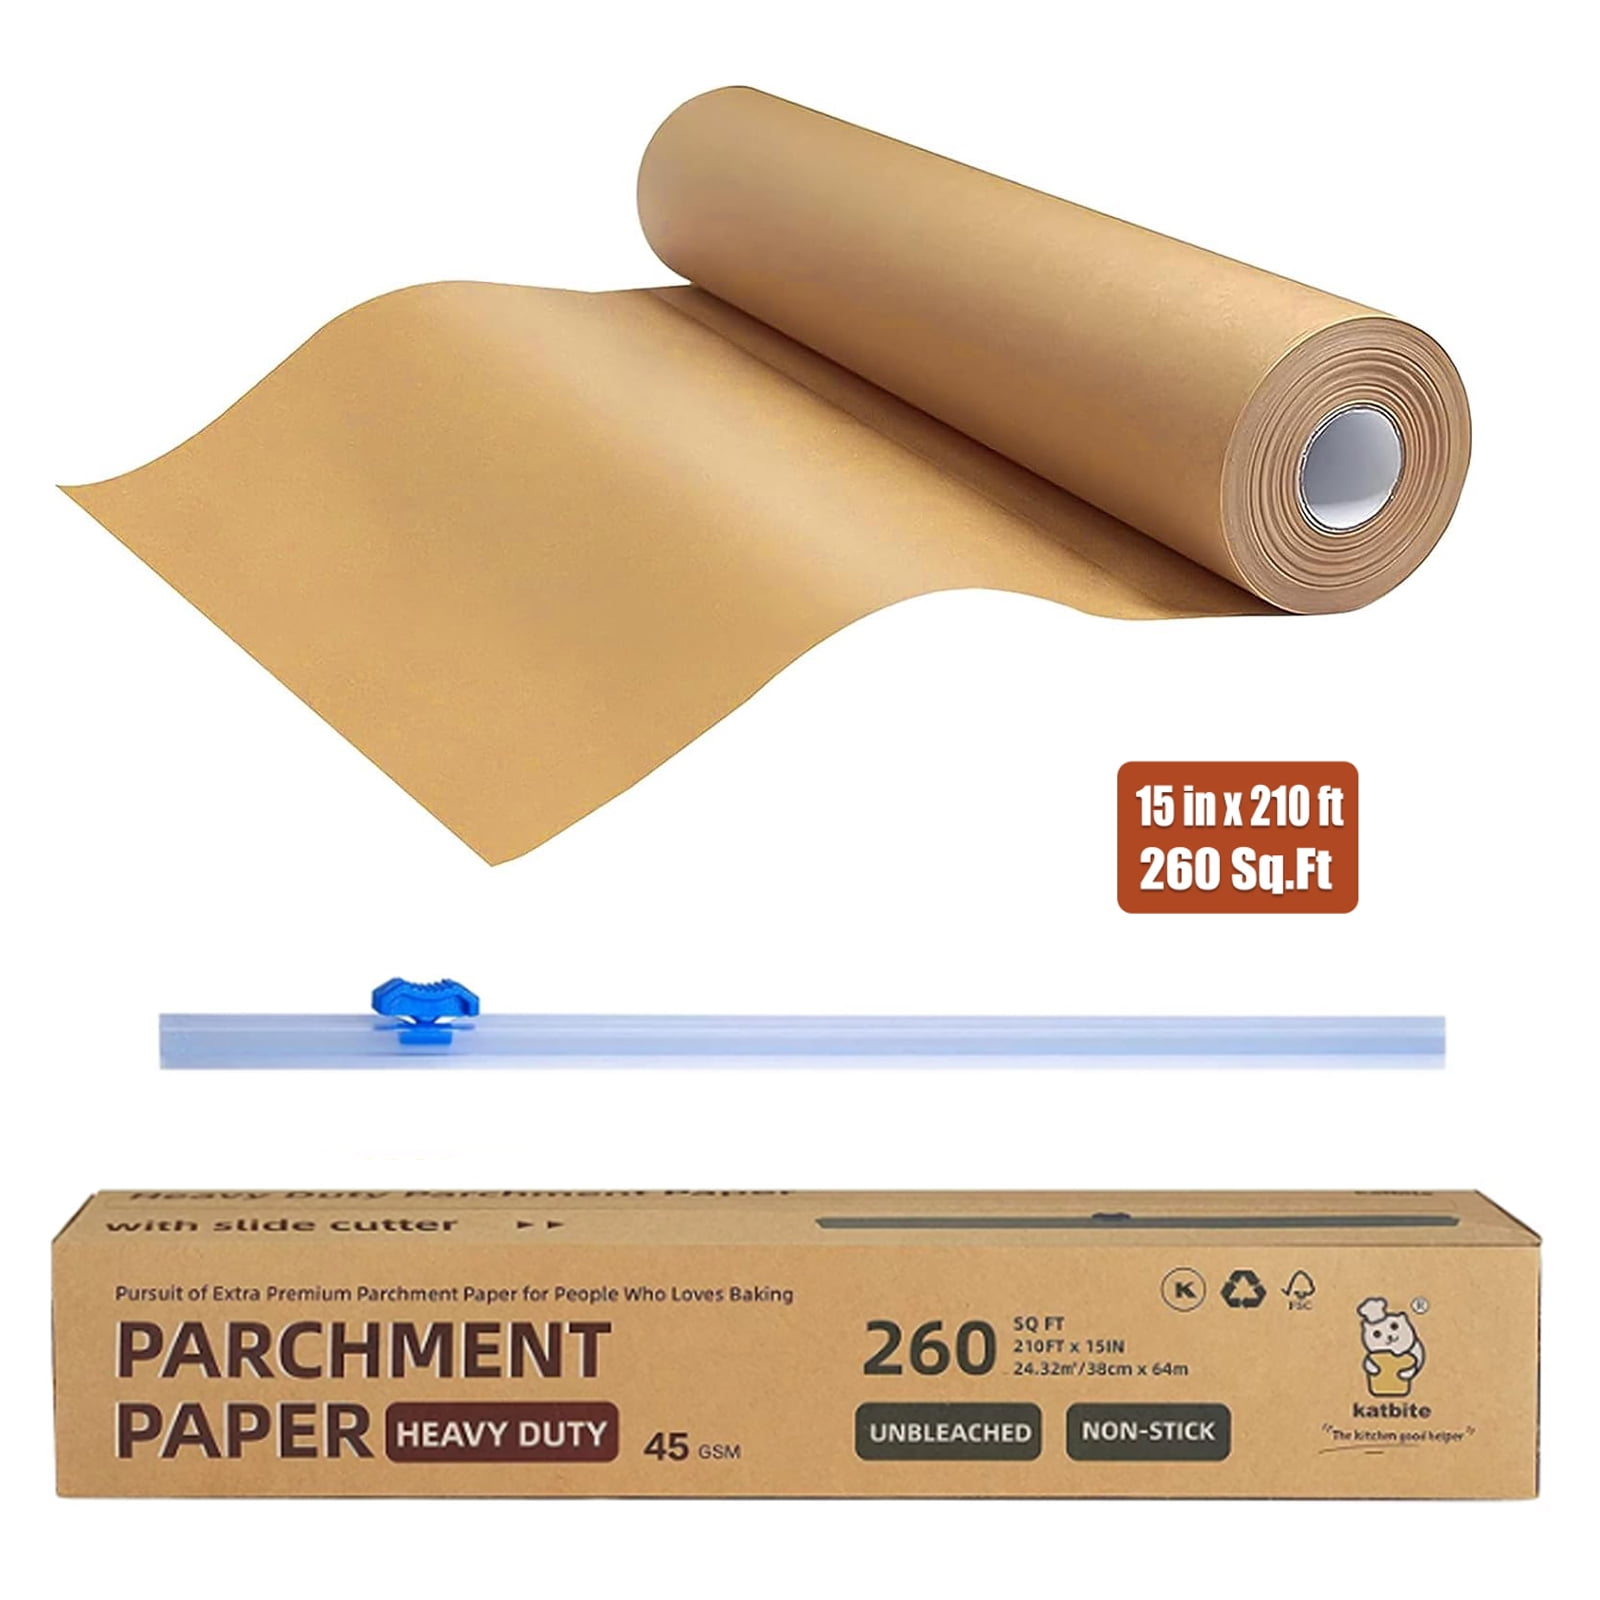 Parchment Paper New Improve For Better Baking 25 SQ.FT Oven Microwave Safe